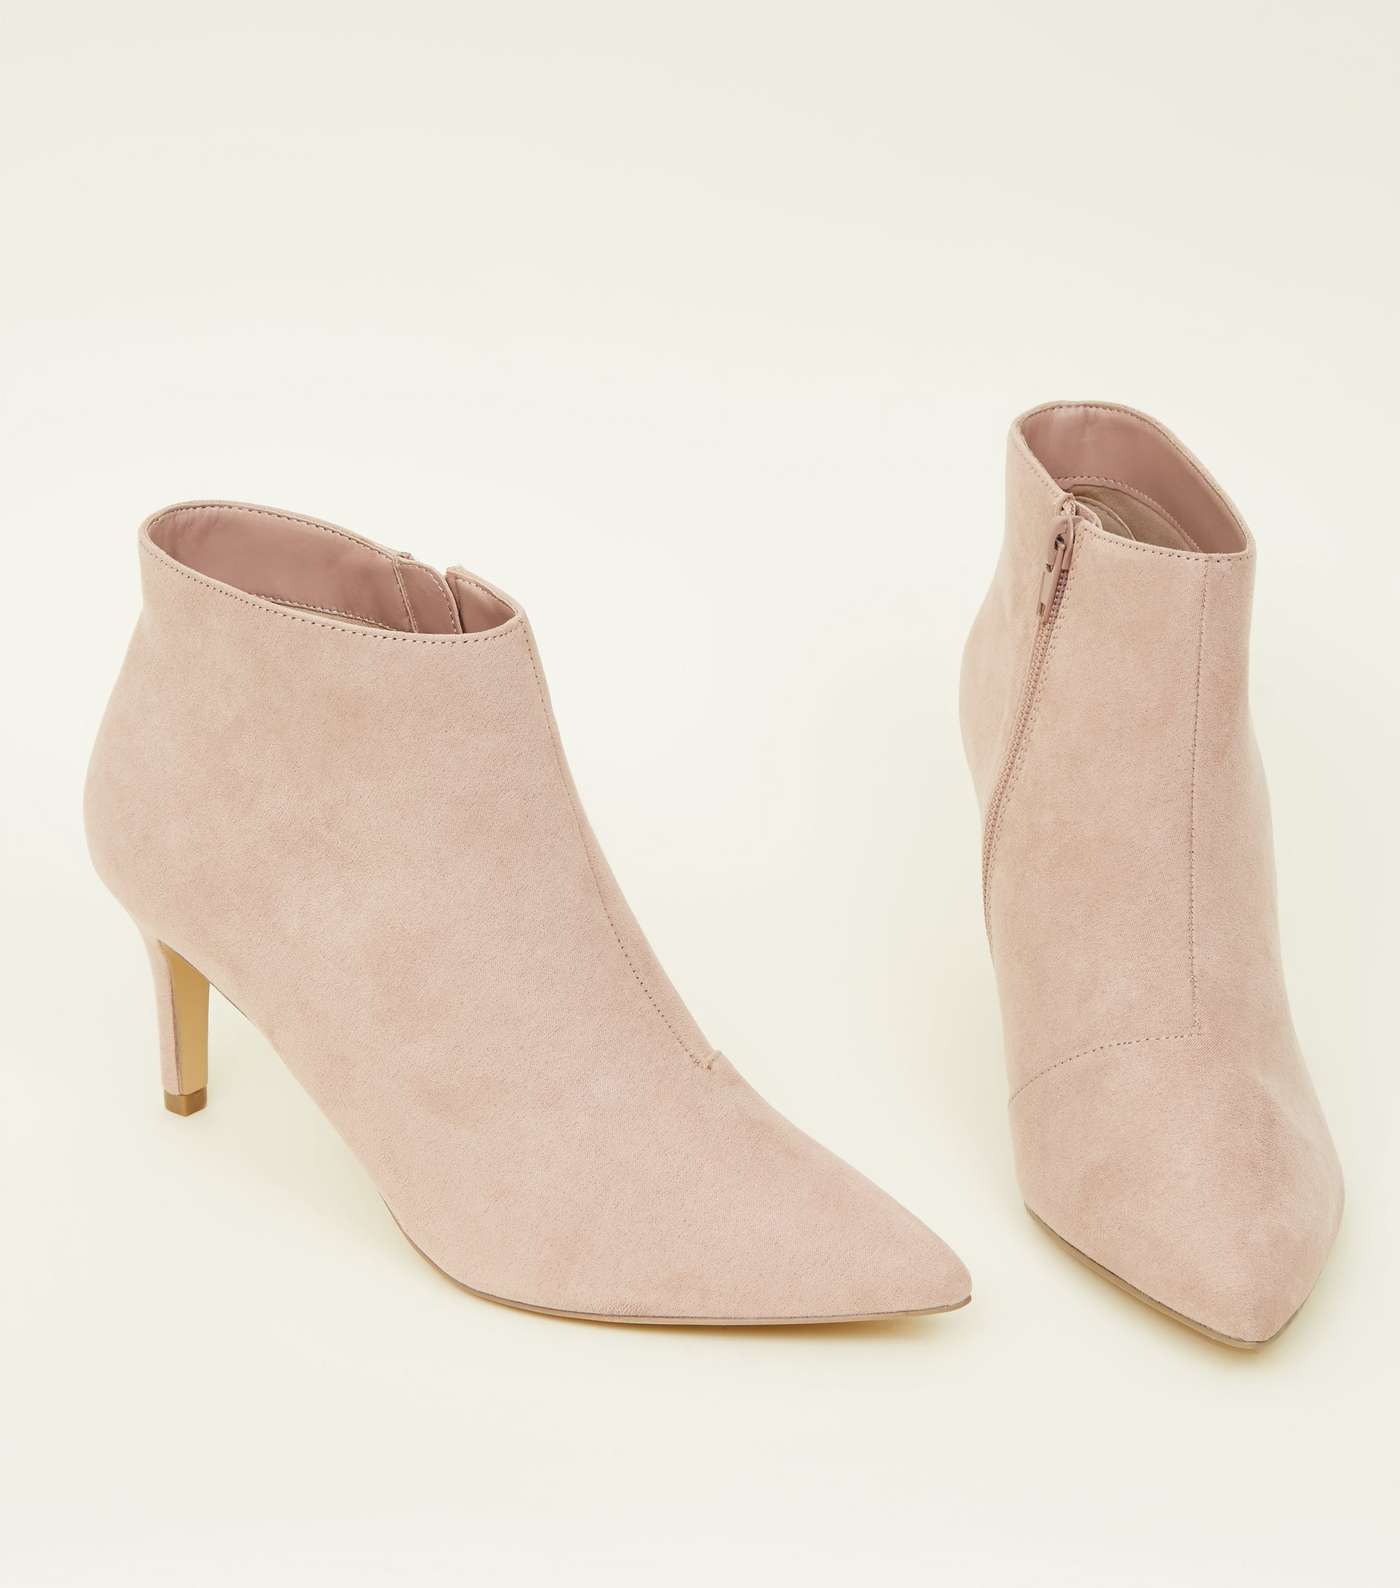 Wide Fit Nude Suedette Stiletto Heel Ankle Boots Image 3